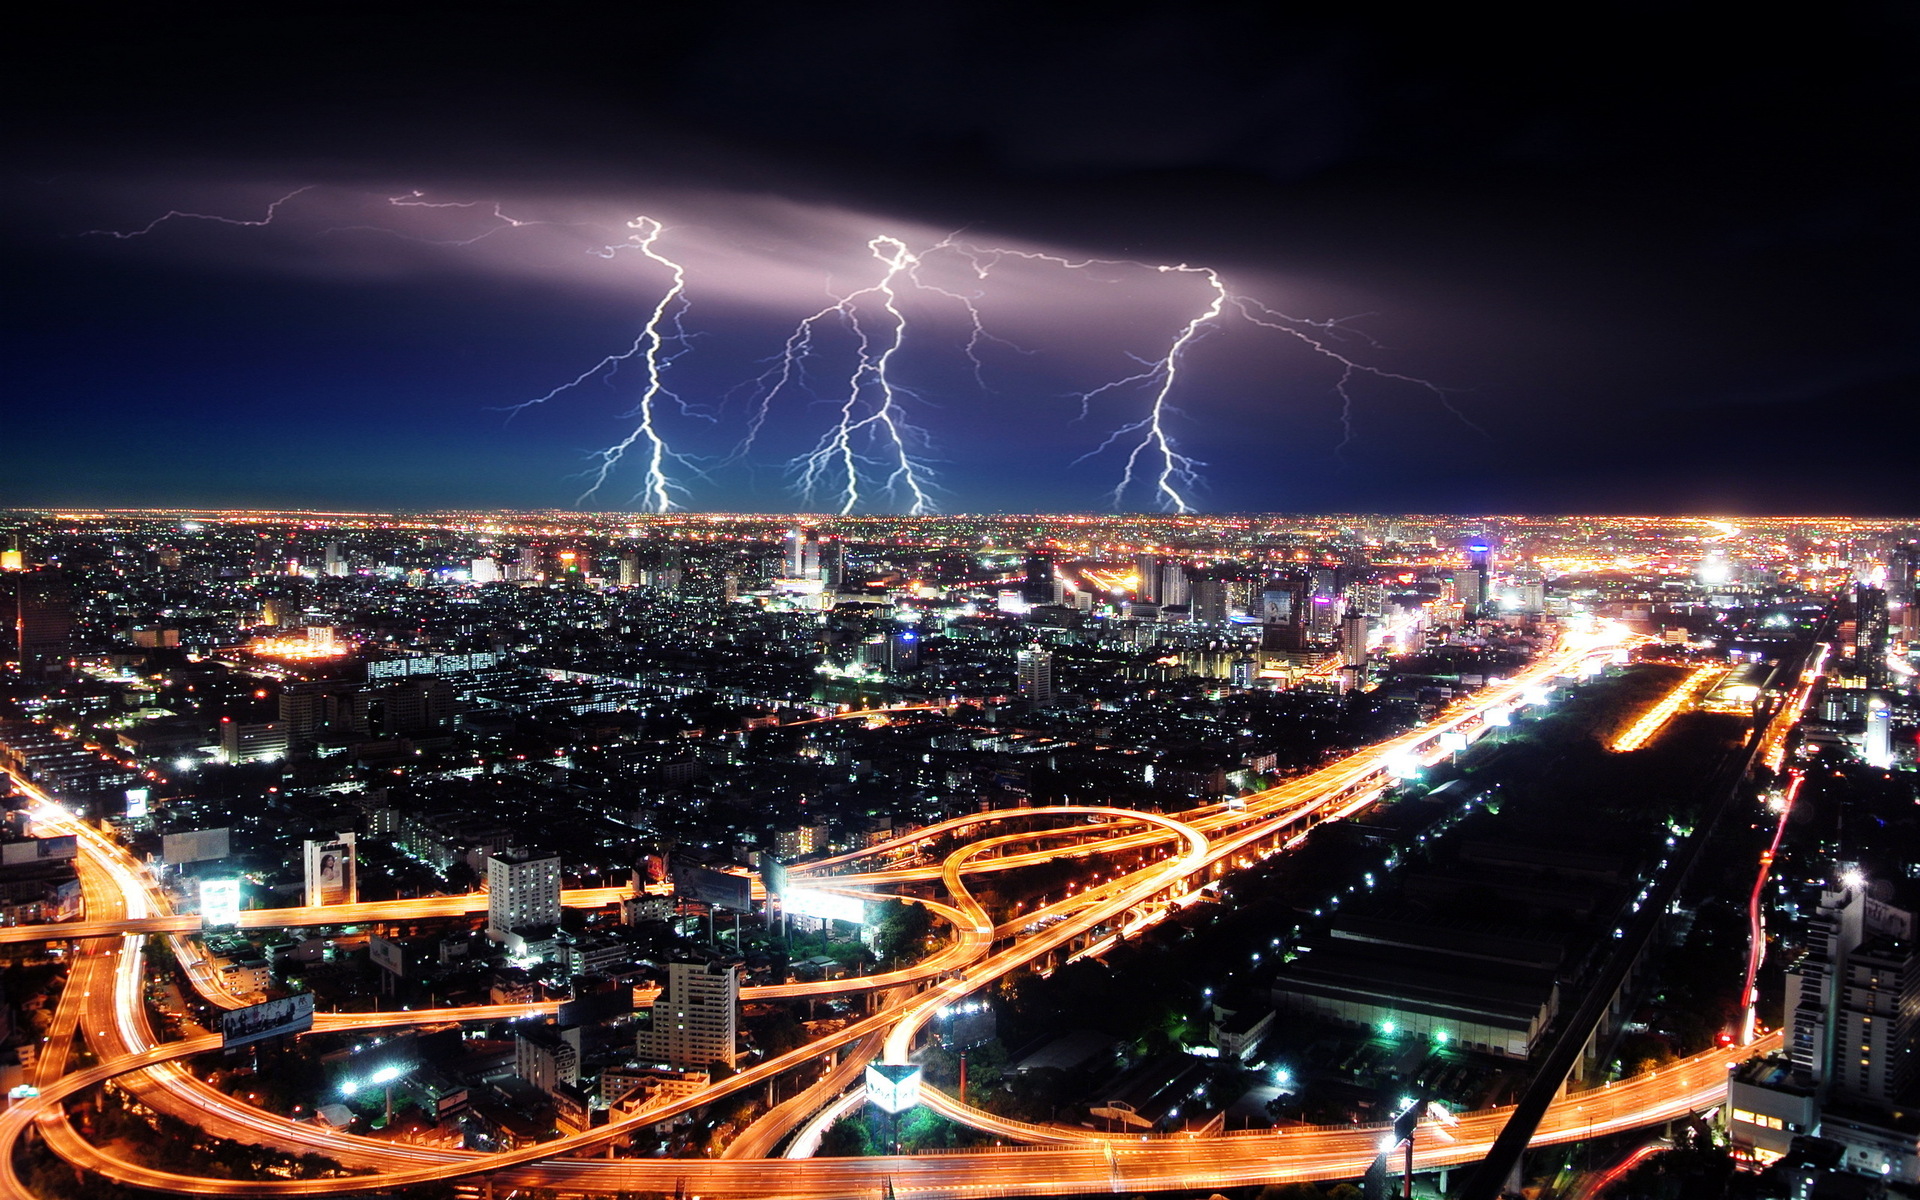 cityscapes, Cities, Architecture, Buildings, Hdr, Roads, Lights, Night, Lightning Wallpaper